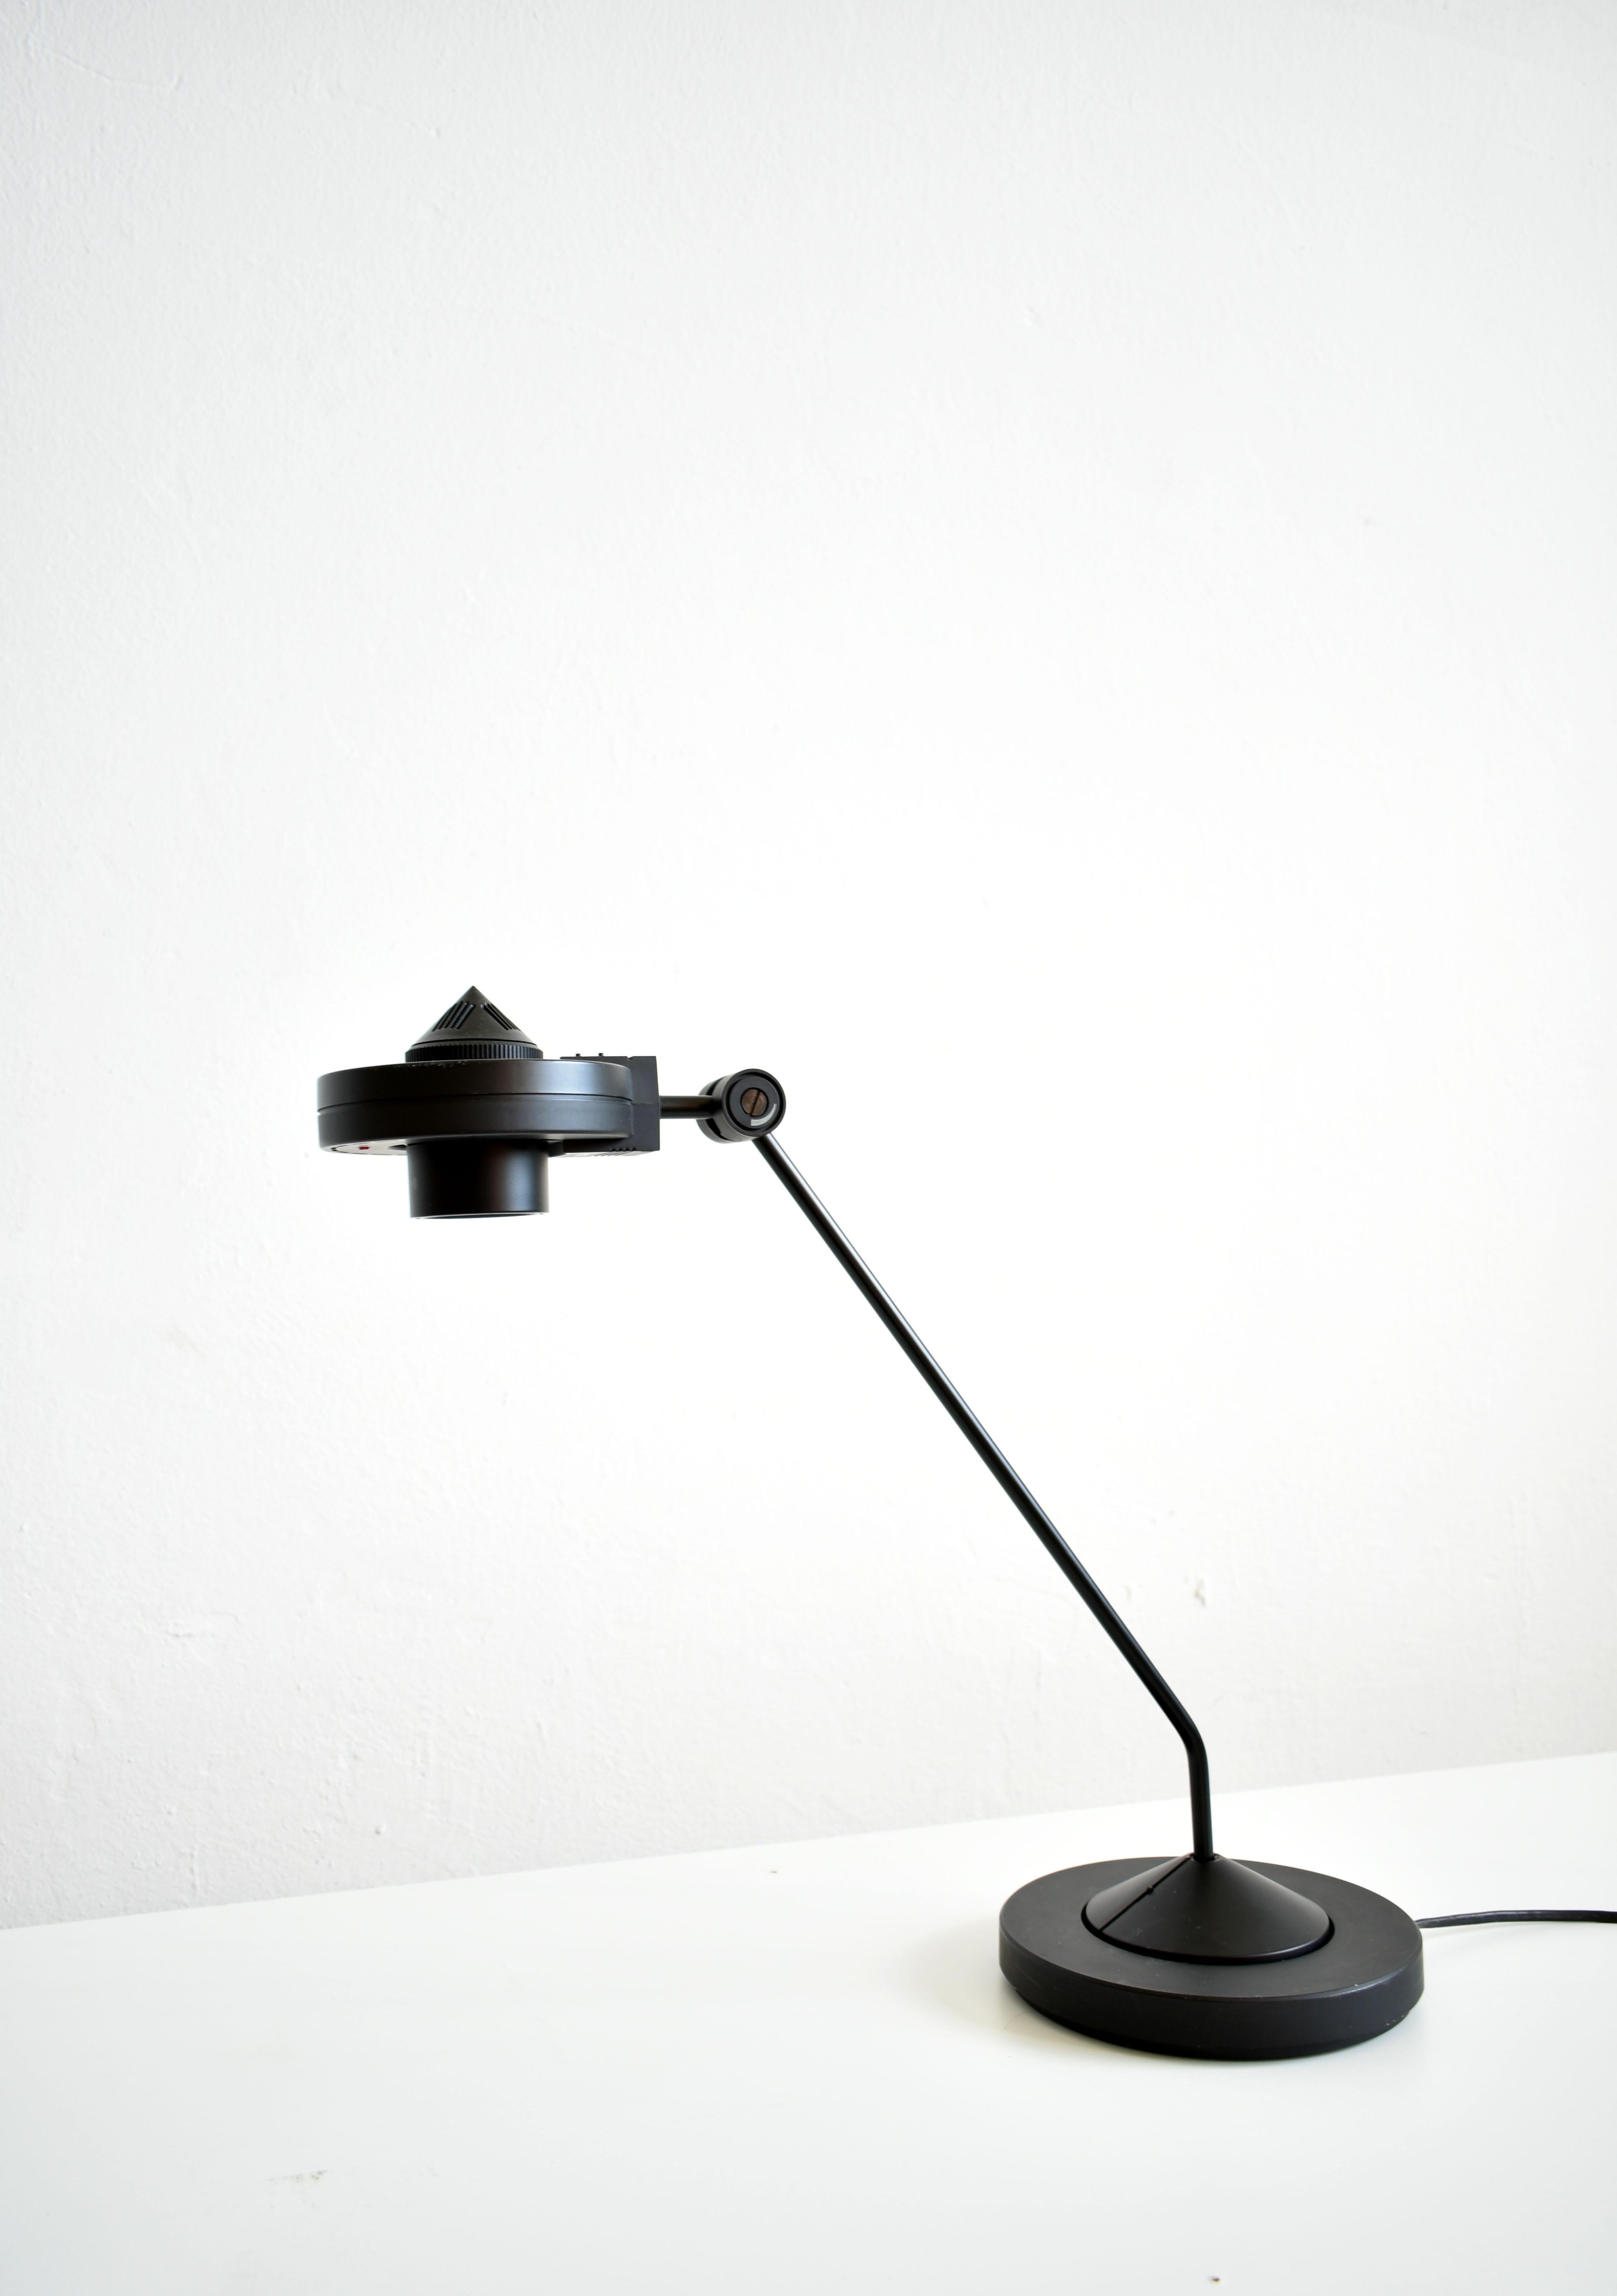 Black metal and plastic dimmable halogen desk lamp produced by German company Staff in 1980's

High-end design from the 1980s

The lamp was designed by German designer Hartmut S. Engel

Heavy base measures 20 cm in diameter, the adjustable